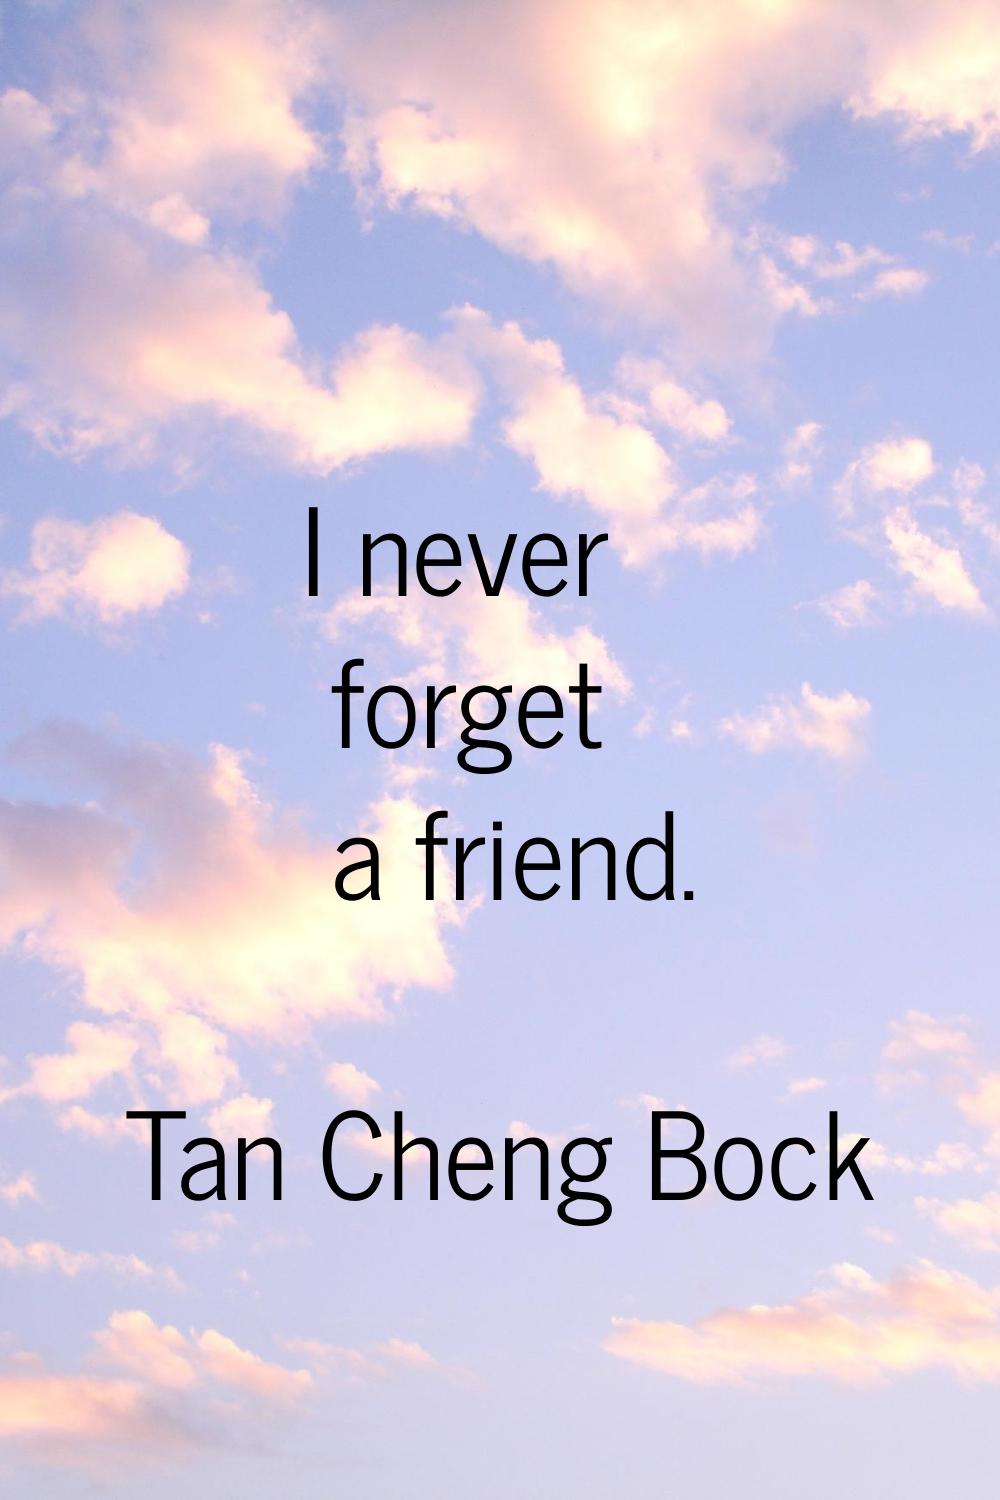 I never forget a friend.